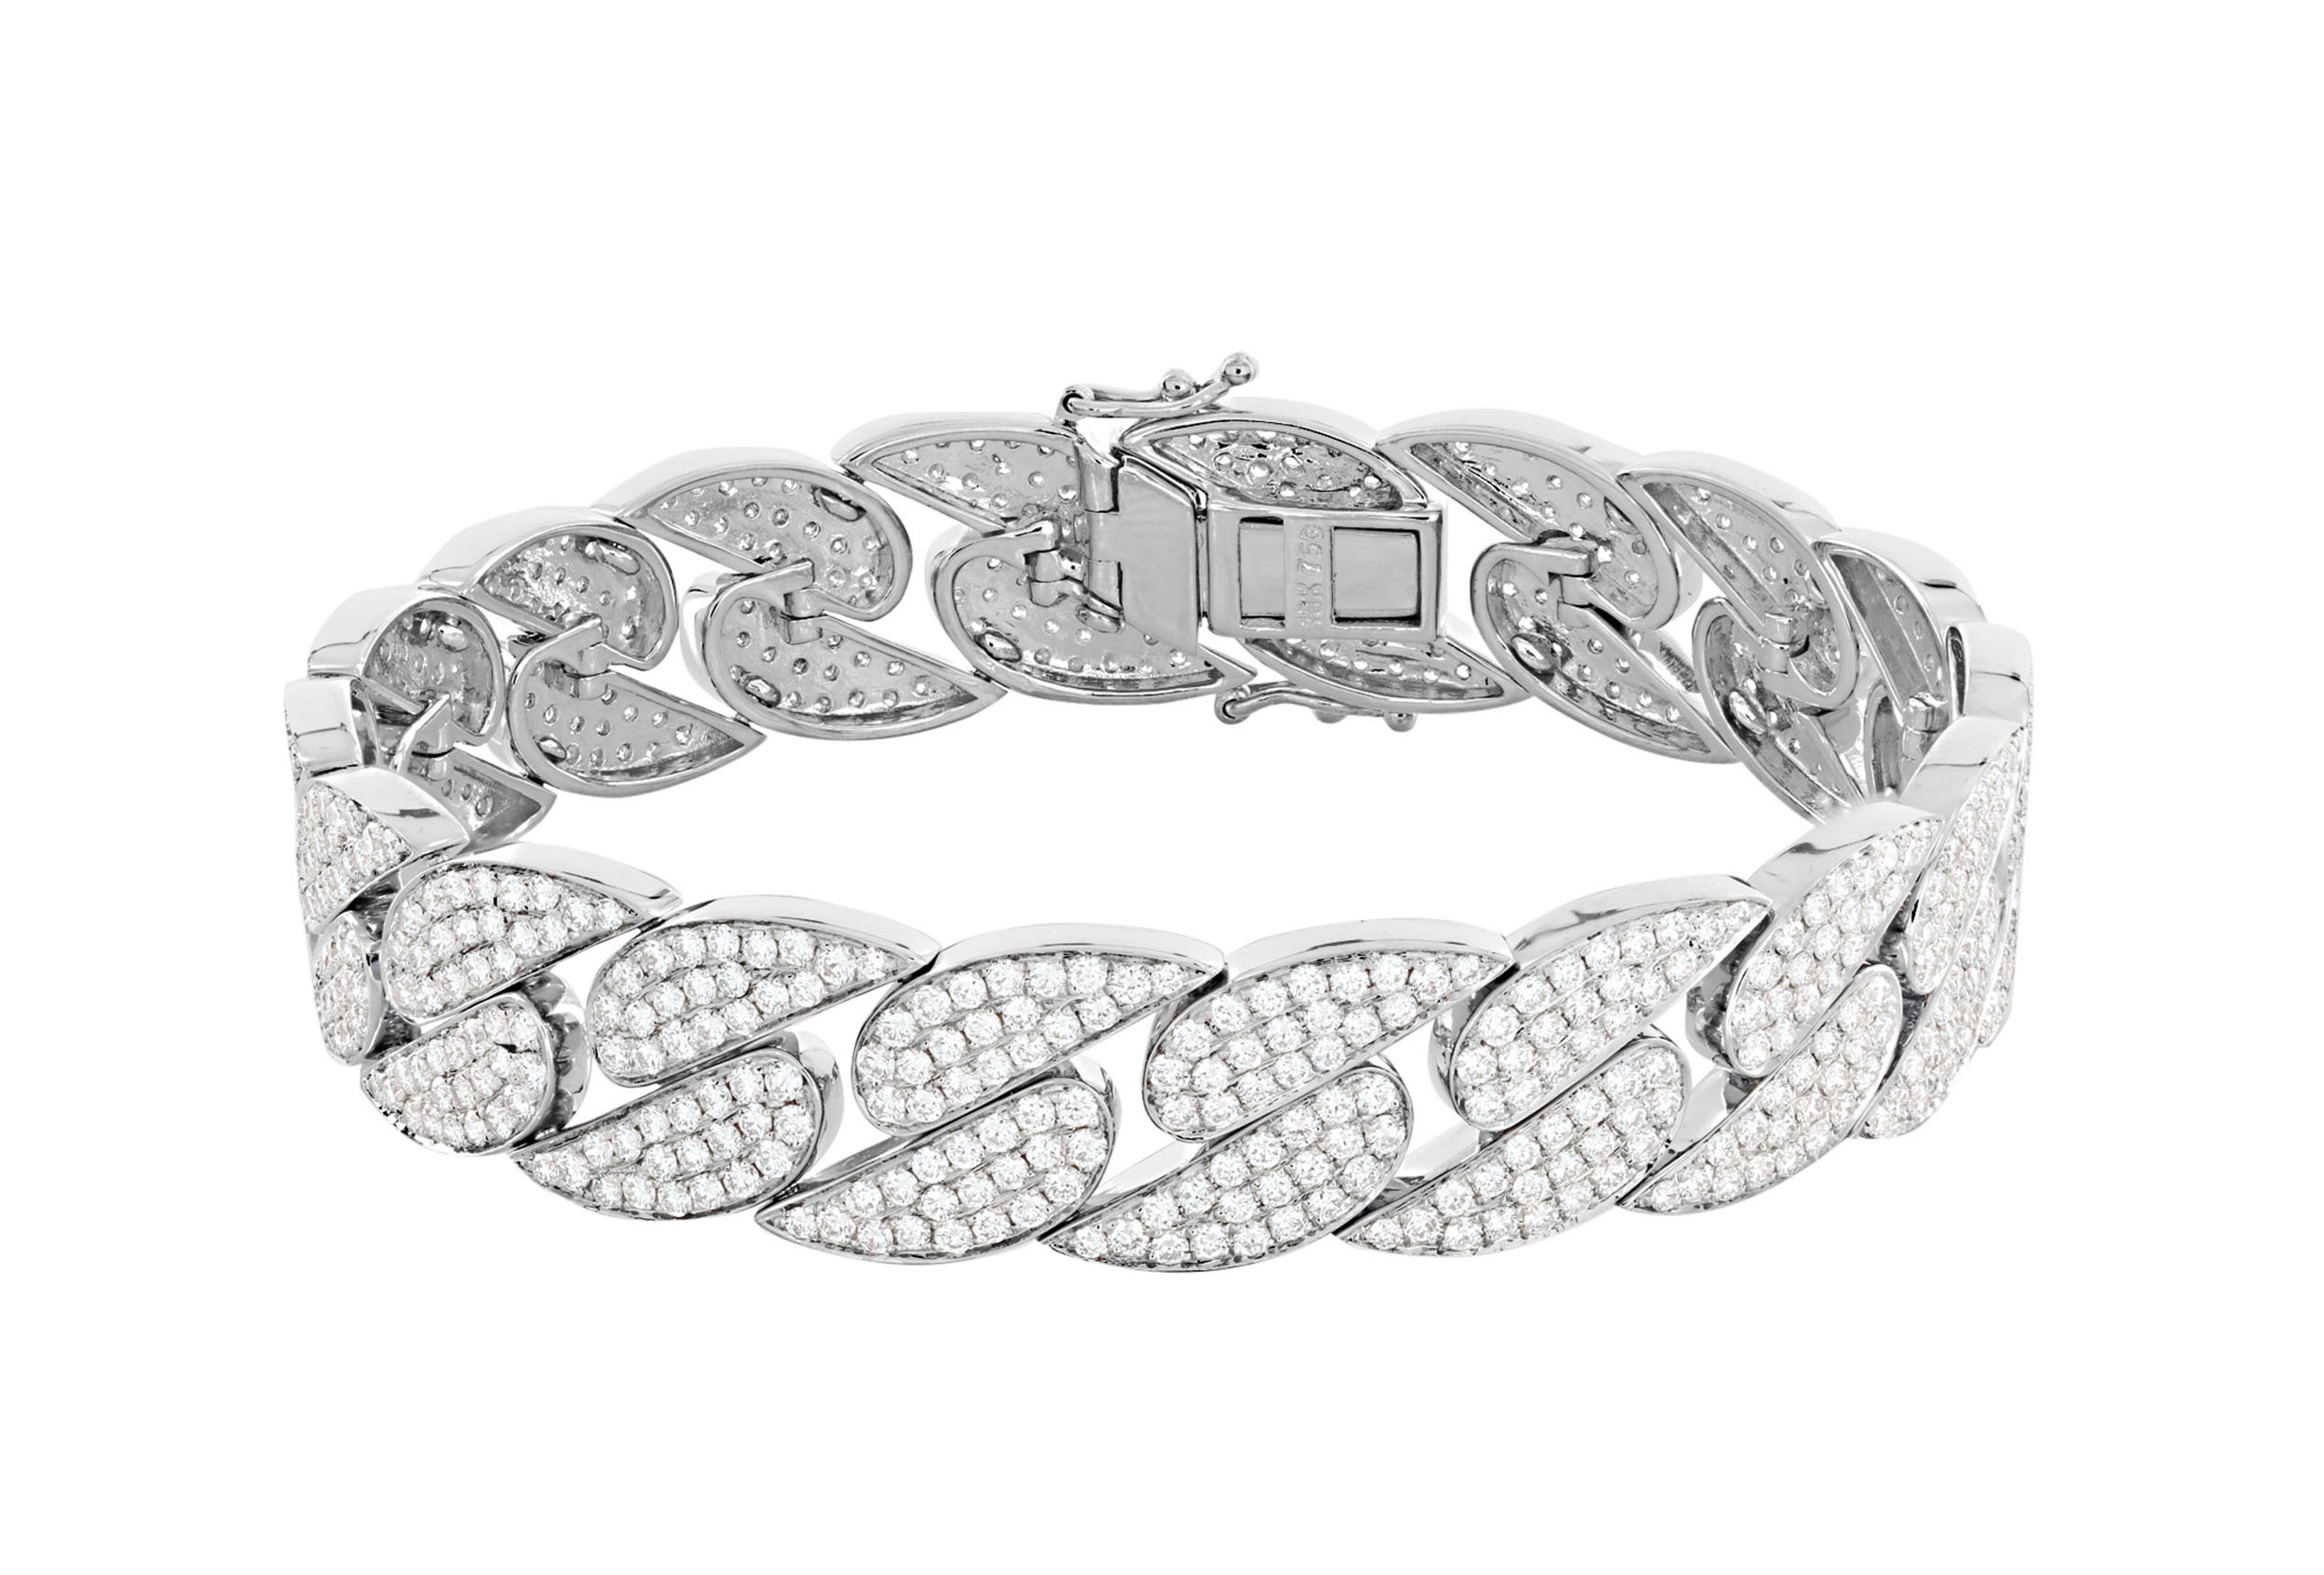 London Collection 18k White Gold and Pave Diamond Curb Link Bracelet